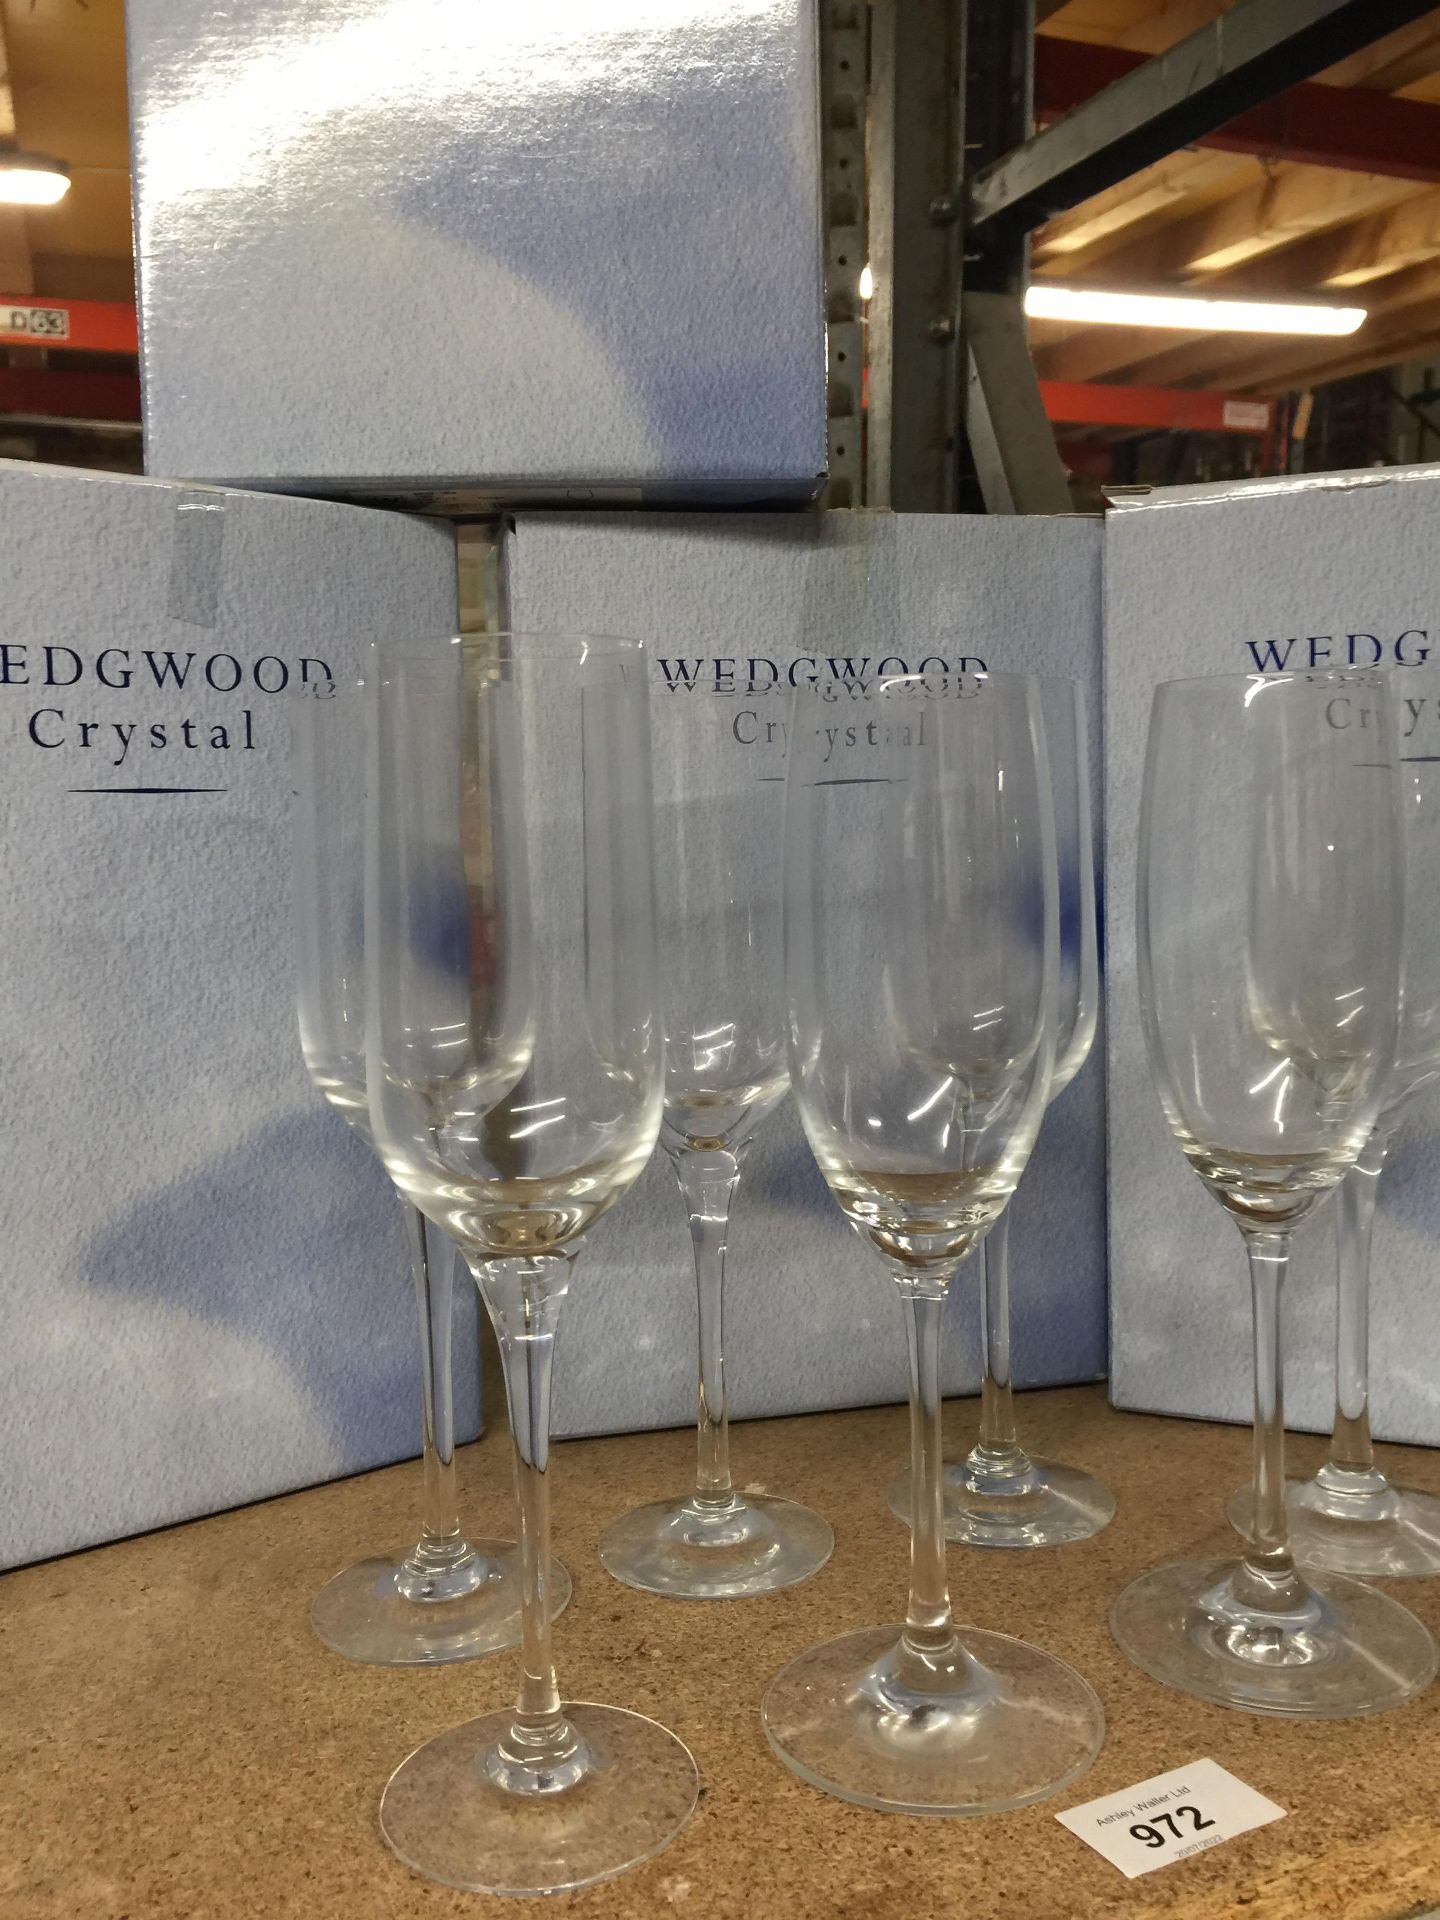 EIGHT BOXED WEDGWOOD CRYSTAL CHAMPAGNE FLUTES - Image 2 of 4